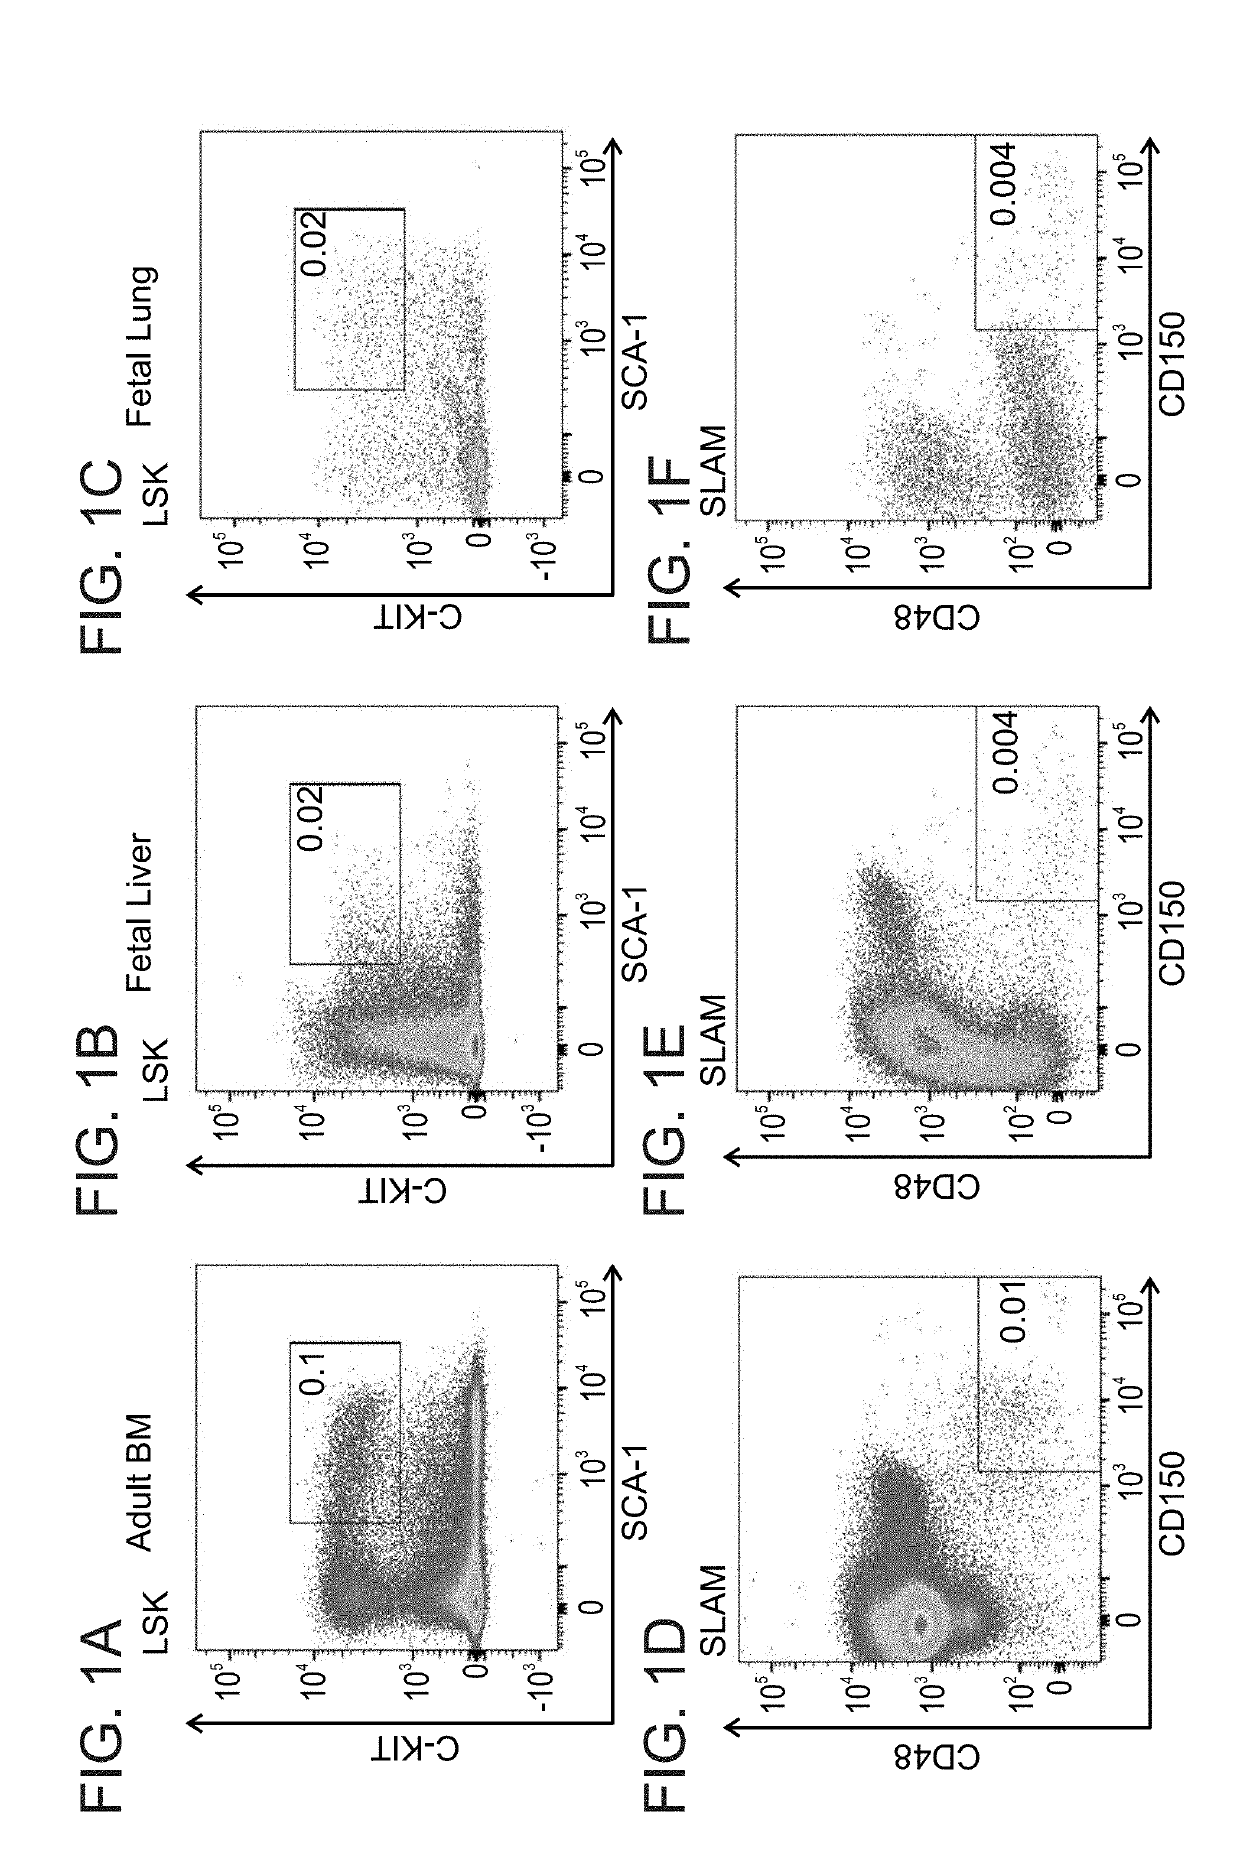 Methods of using pulmonary cells for transplantation and induction of tolerance